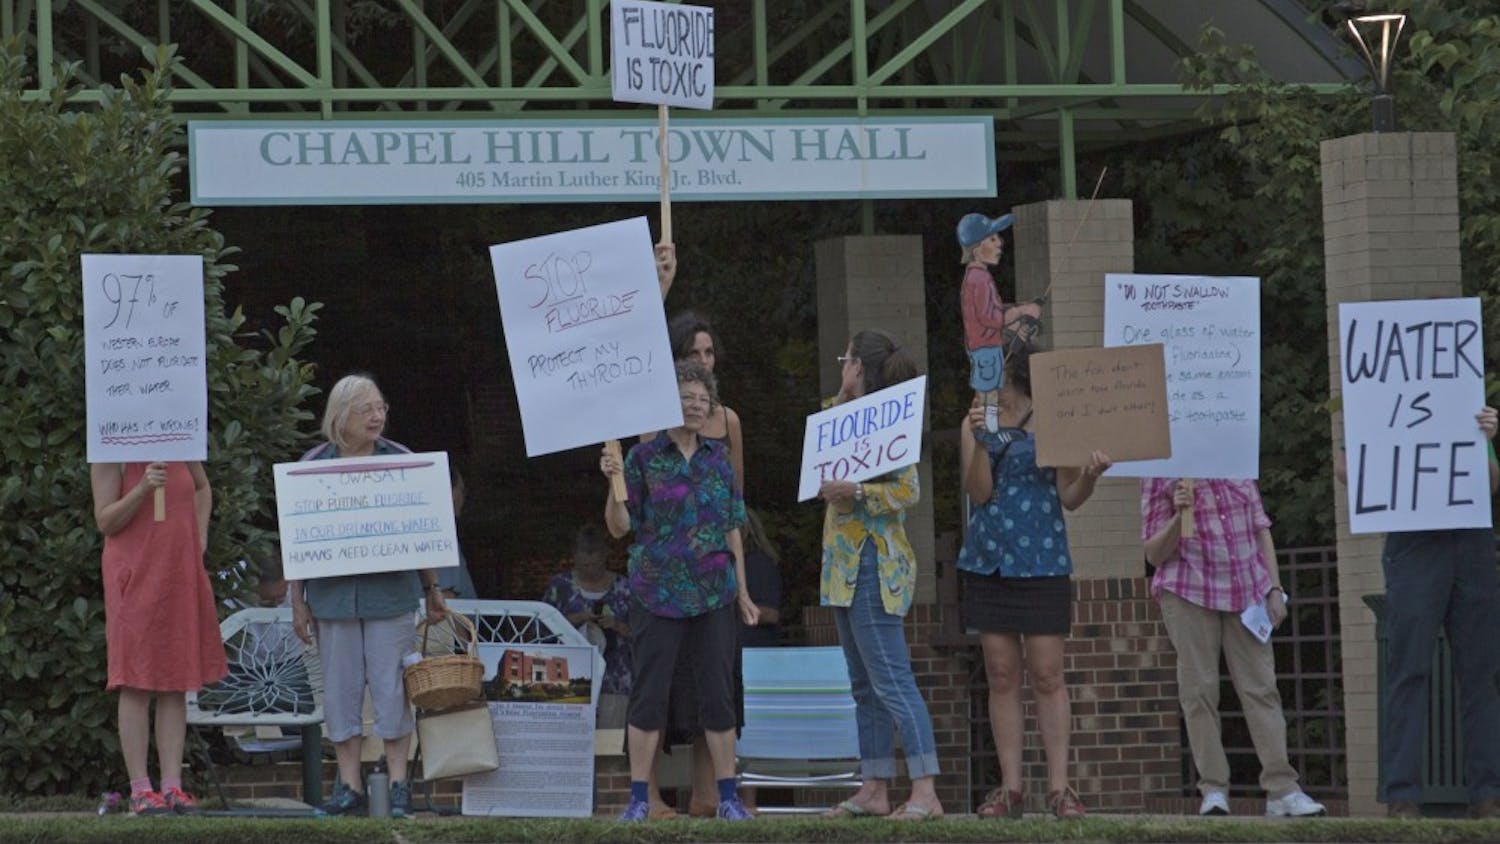 A number of local activists took to the sidewalks outside of Chapel Hill Town Hall on the evening of Thursday, August 24th, to protest the OWASA board's continued fluoridation of Orange County water sources.